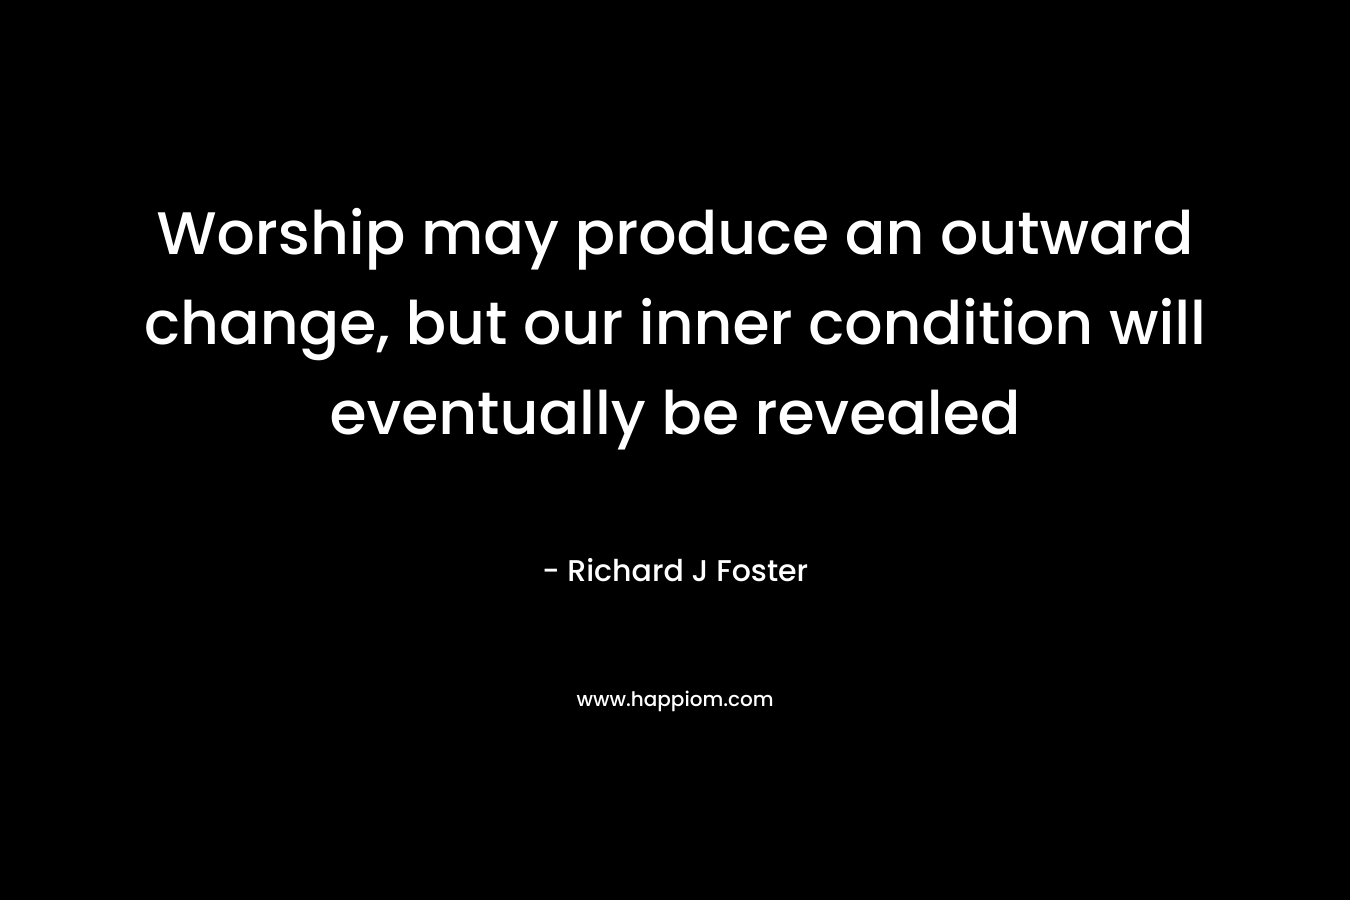 Worship may produce an outward change, but our inner condition will eventually be revealed – Richard J Foster